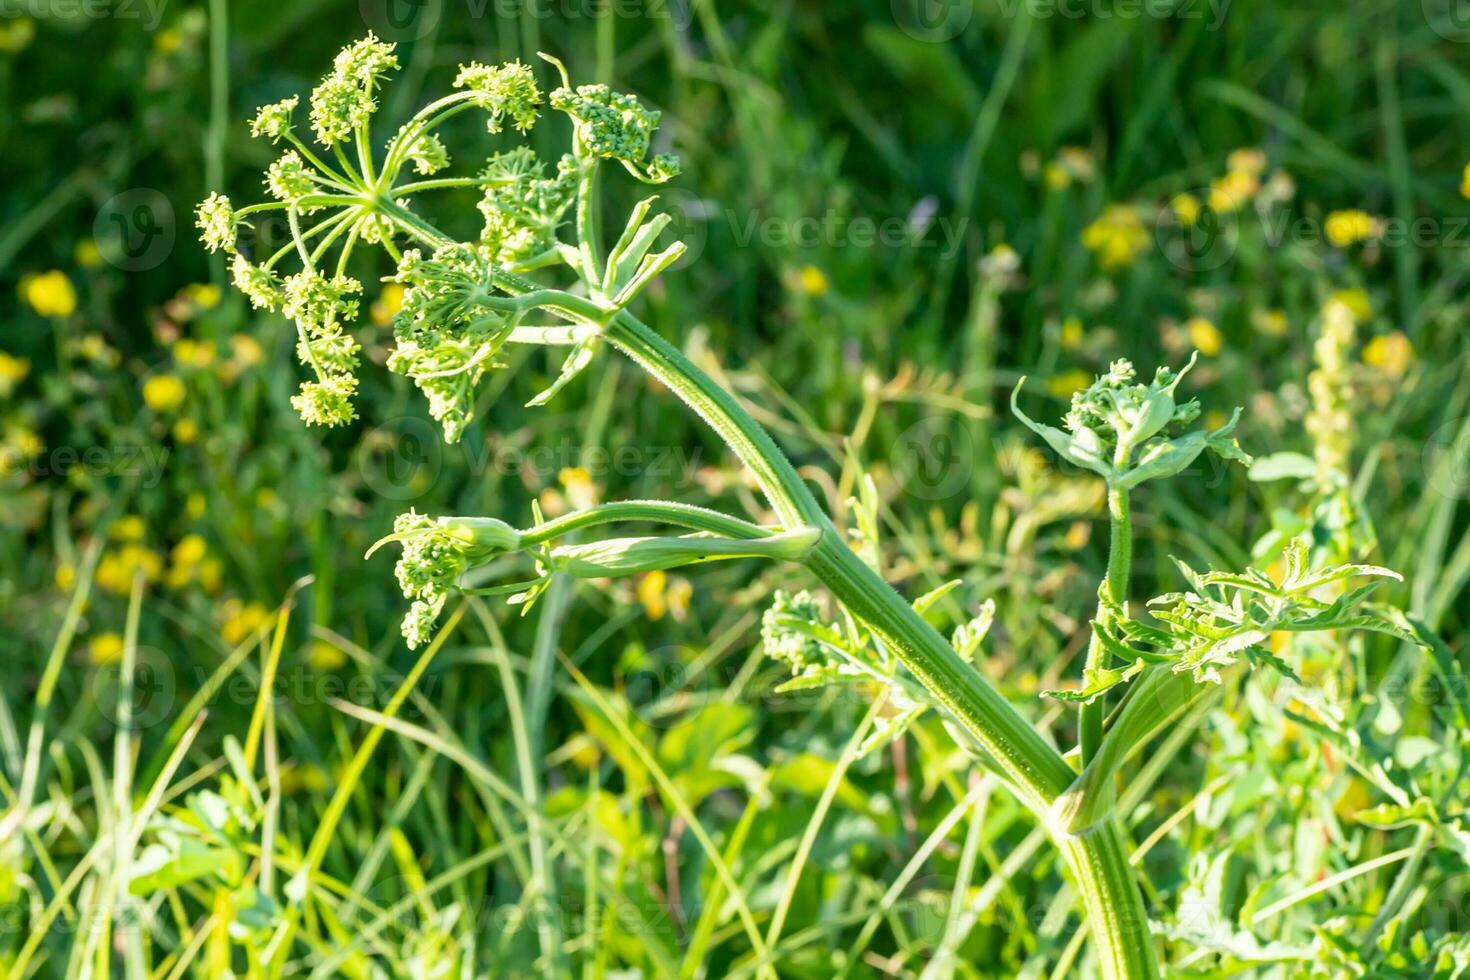 Heracleum sosnowskyi, Sosnowsky's hogweed, giant heads of cow parsnip seeds, a poisonous plant family Apiaceae on a meadow against grass with Graphosoma lineatum photo